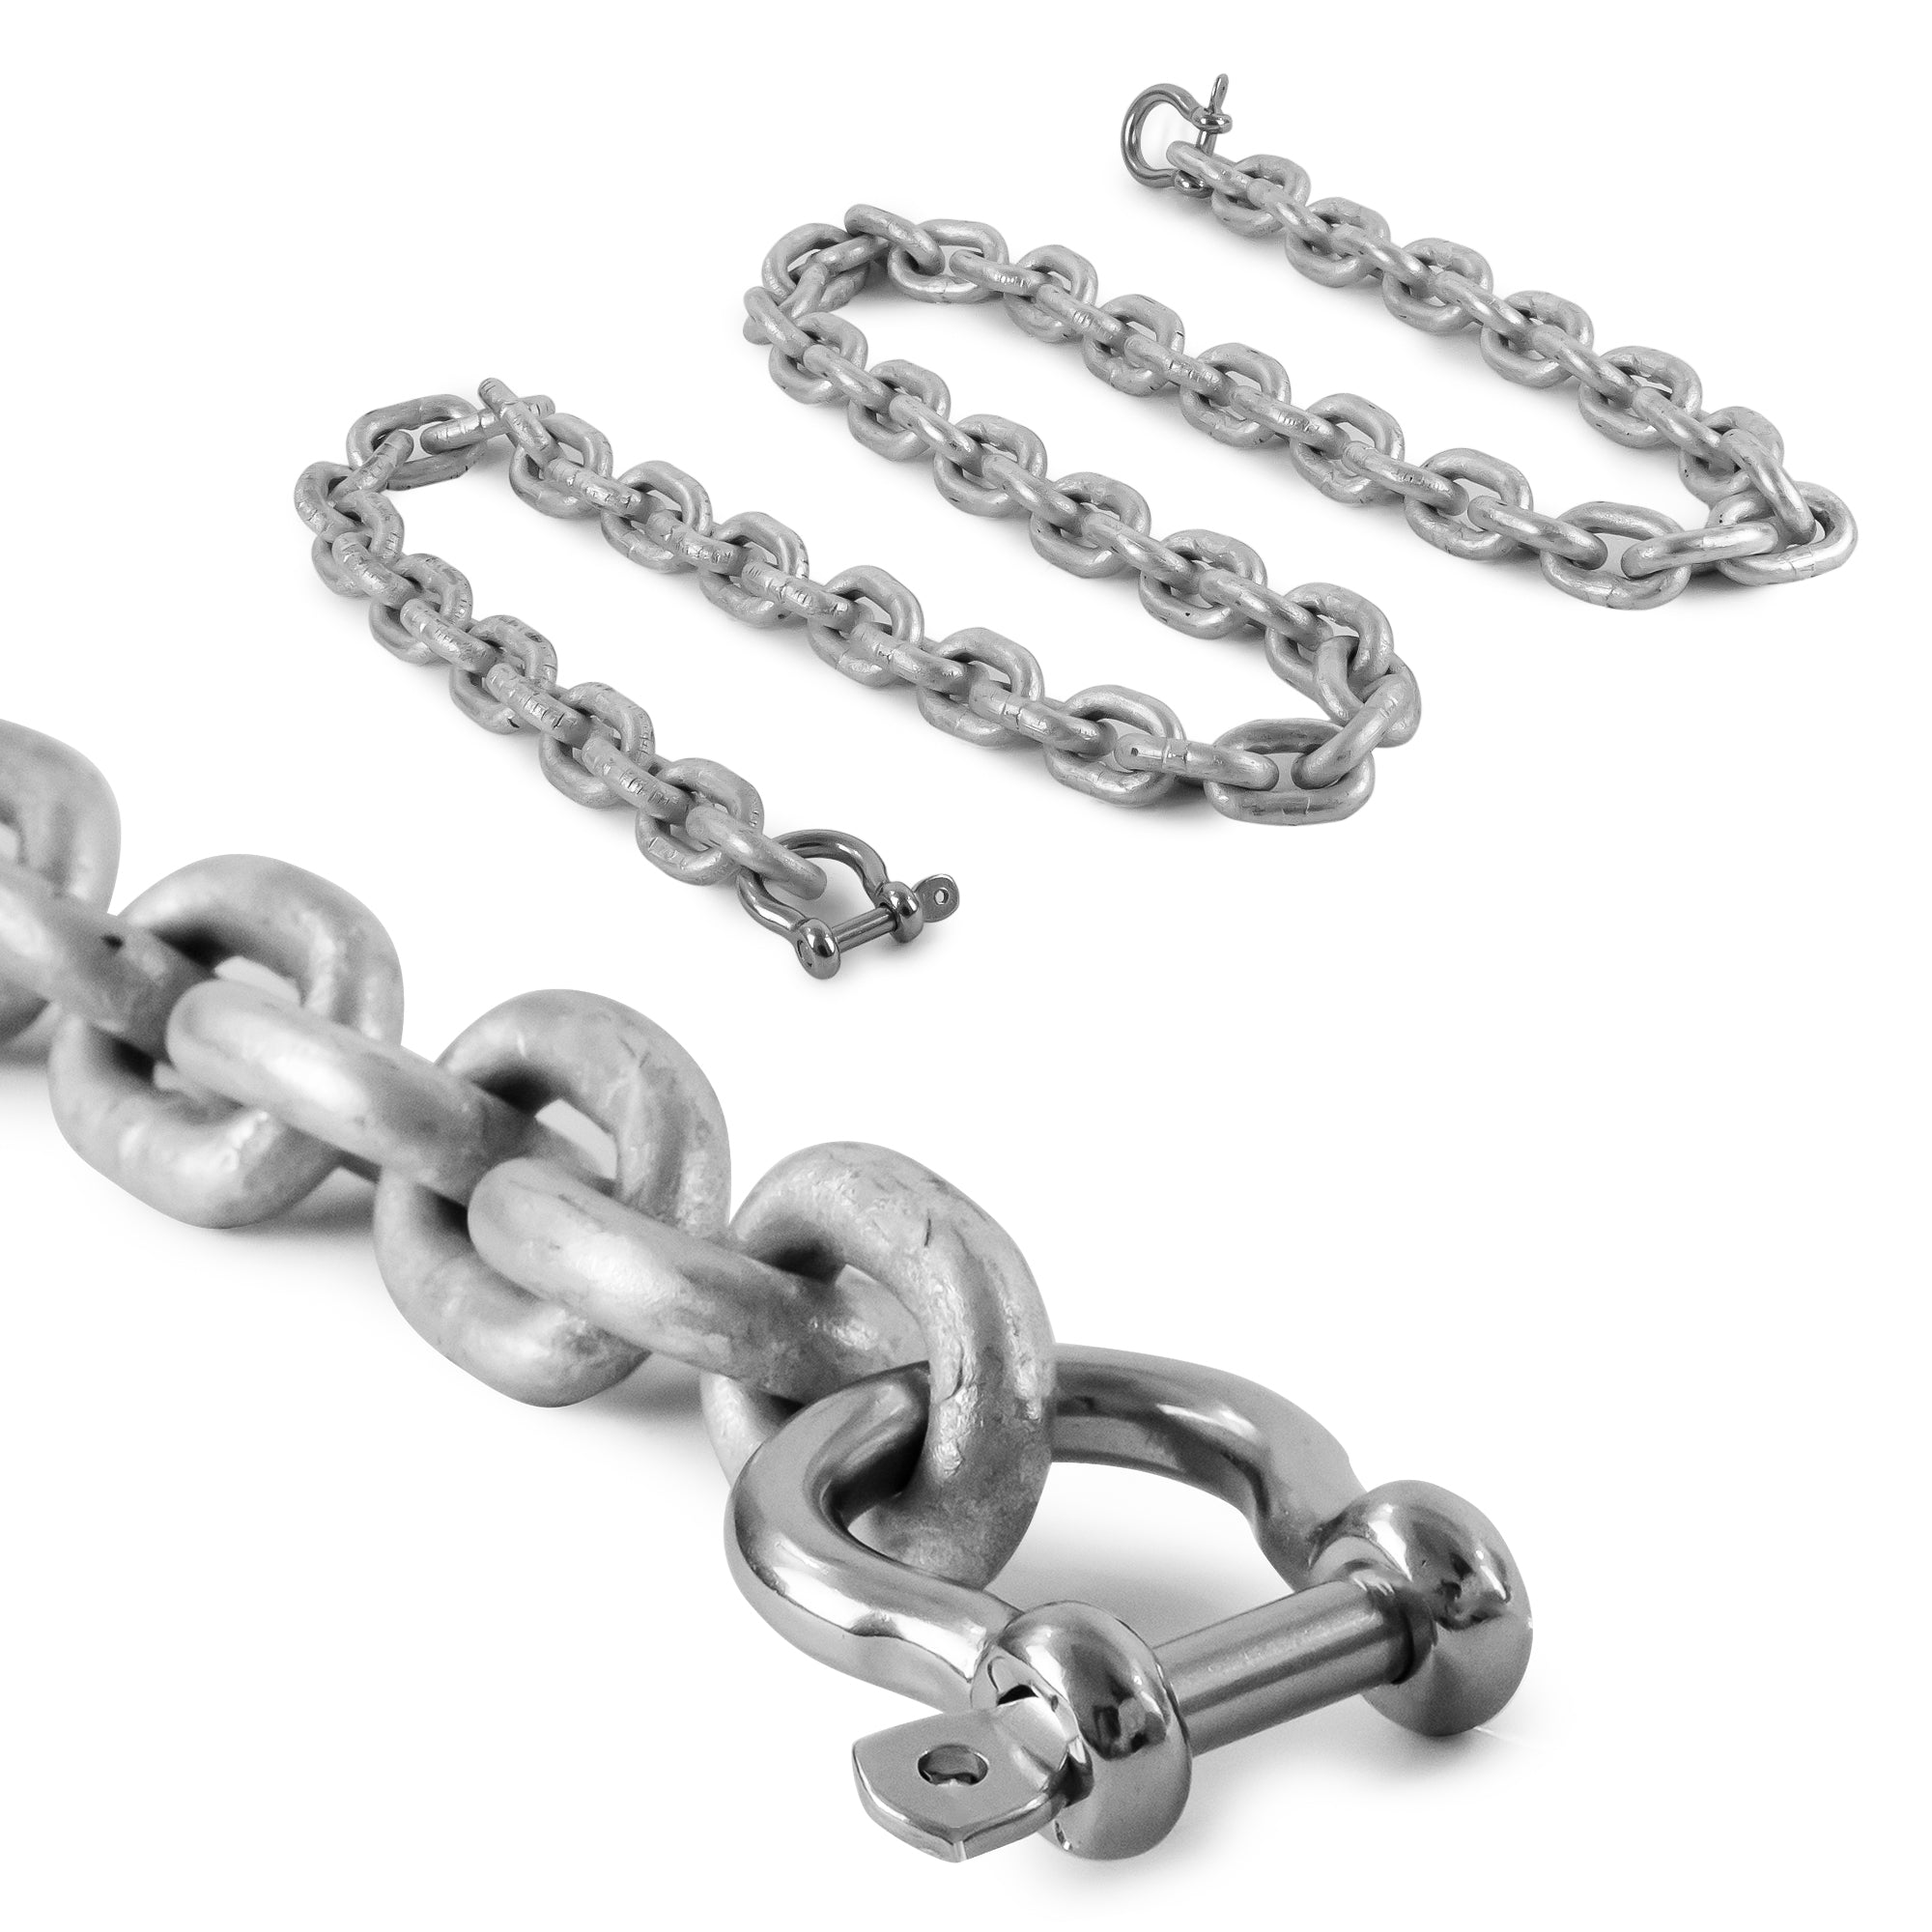 Boat Anchor Lead Chain with Shackles,  1/4" x 5', HTG4 Galvanized Steel - FO4489-G5